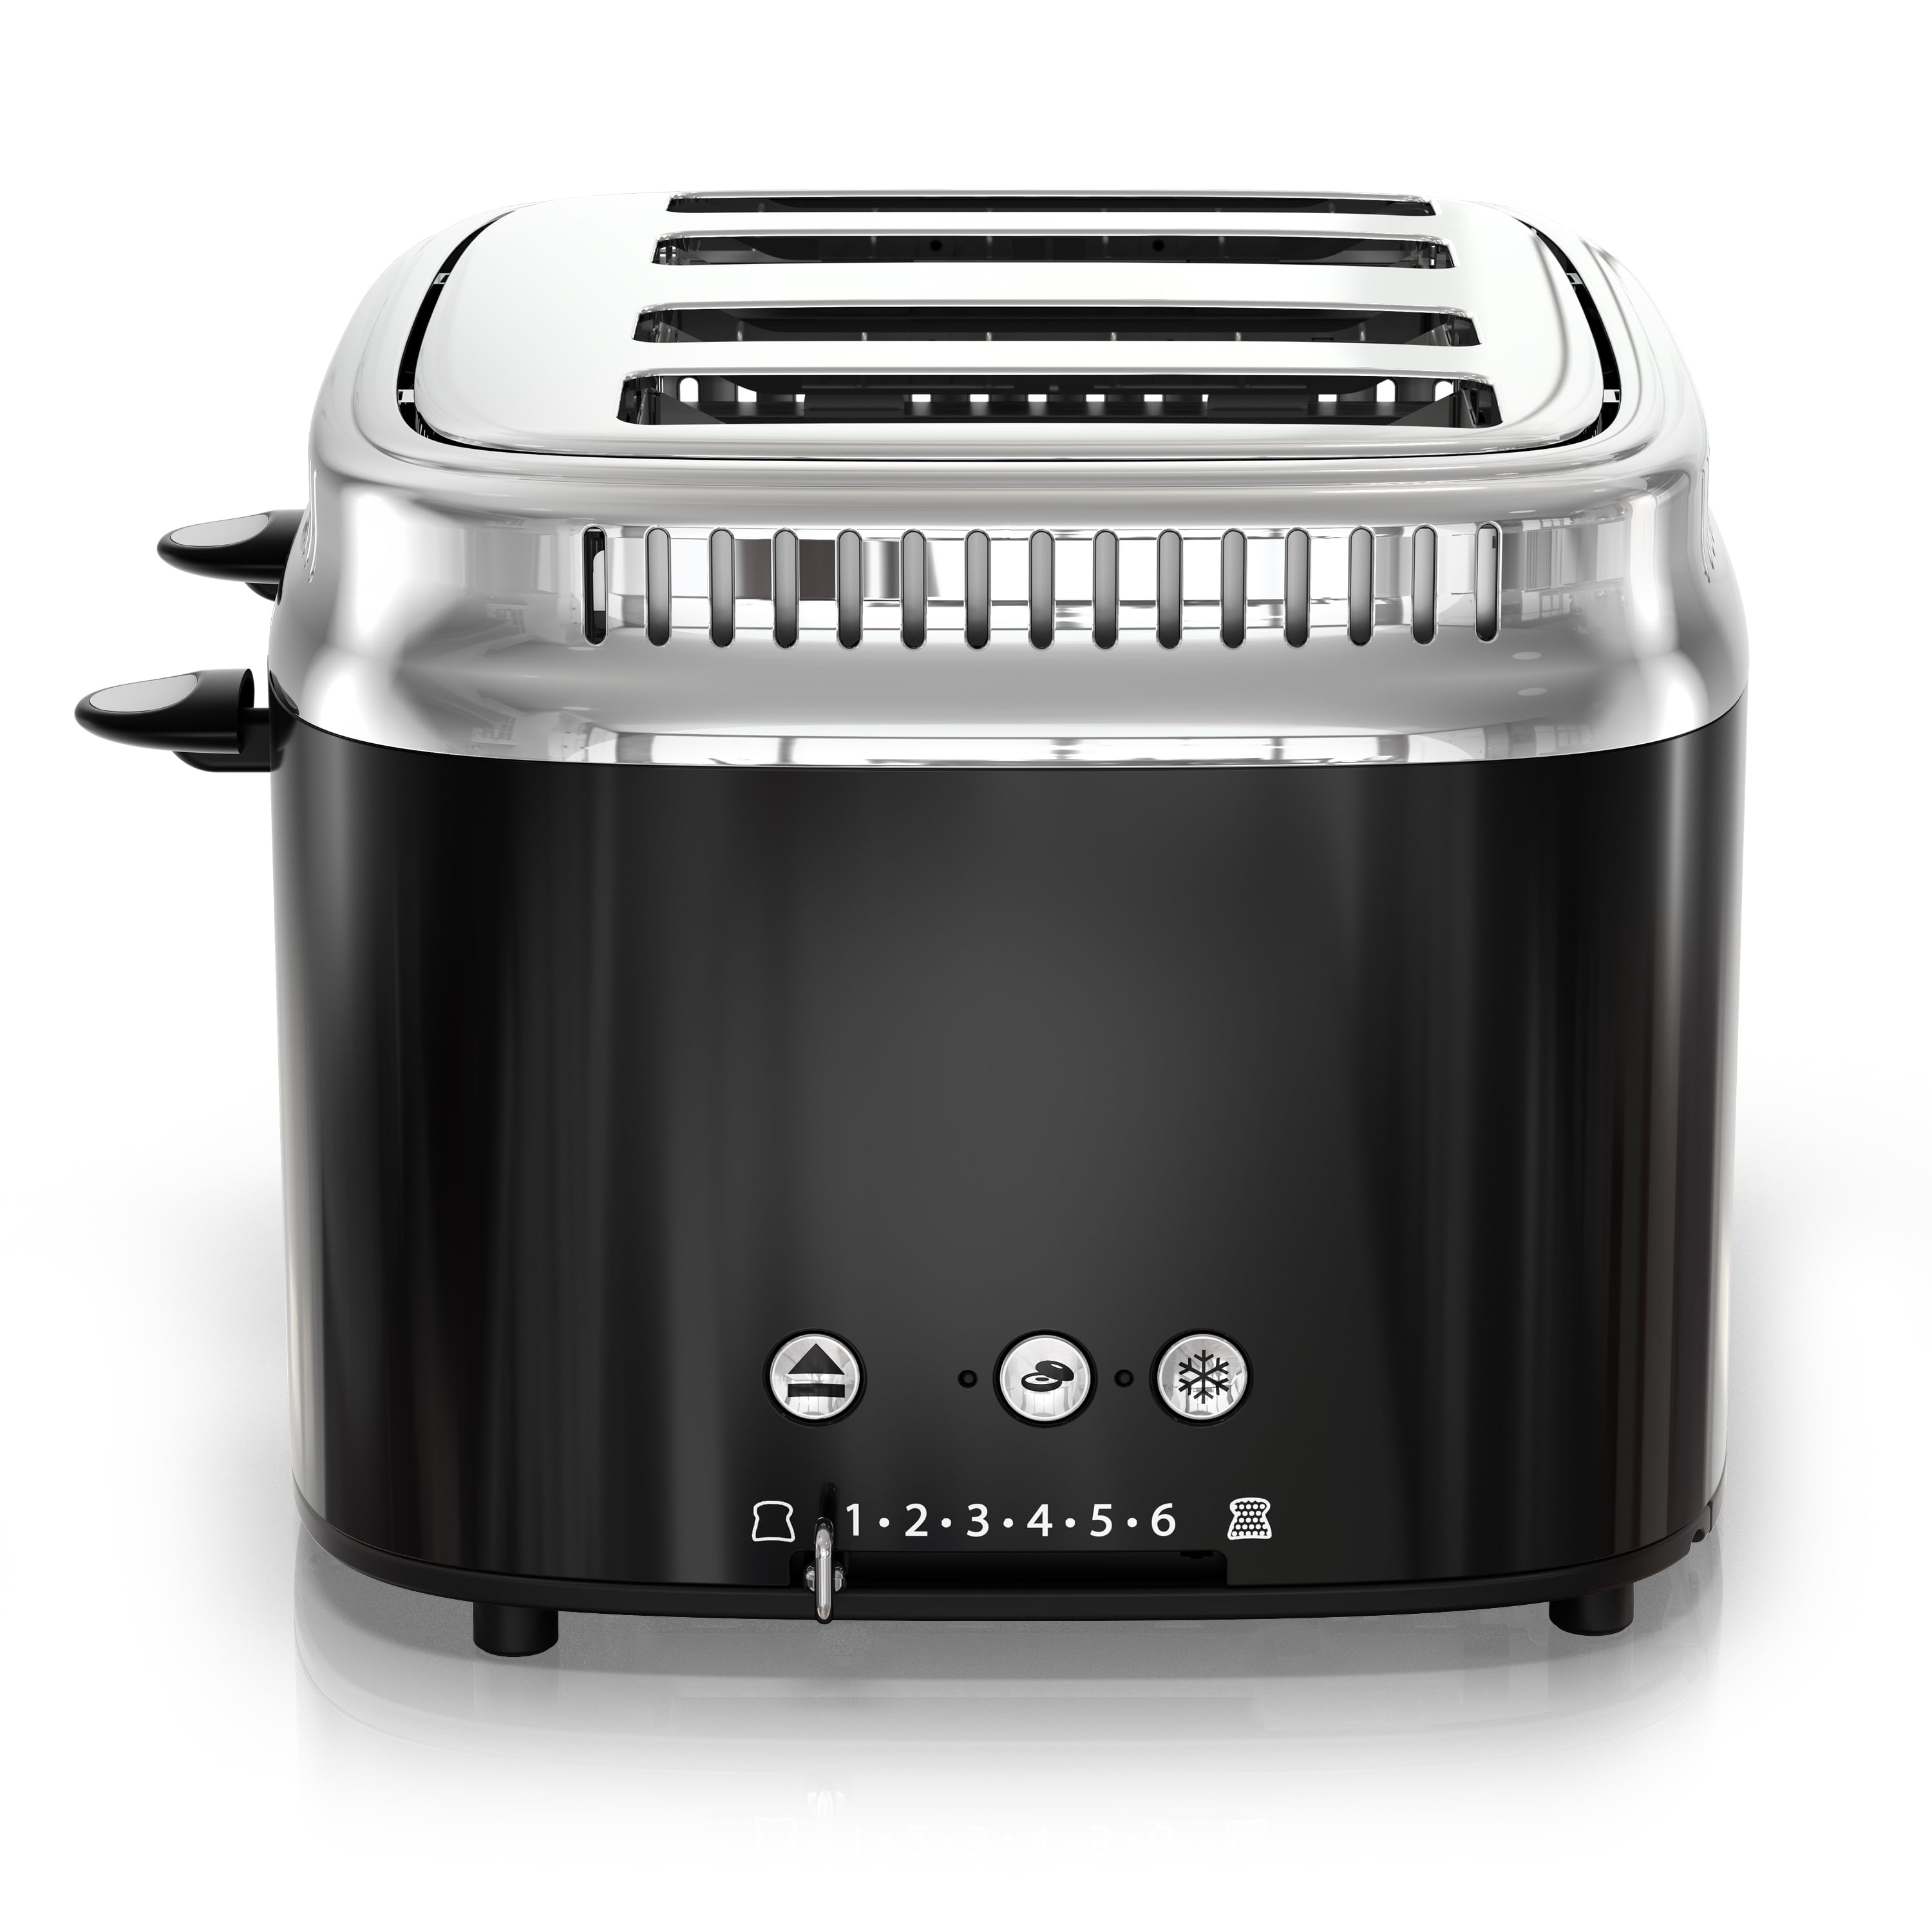 Russell Hobbs TR9450BR Retro Style 4 Slice Toaster in Black